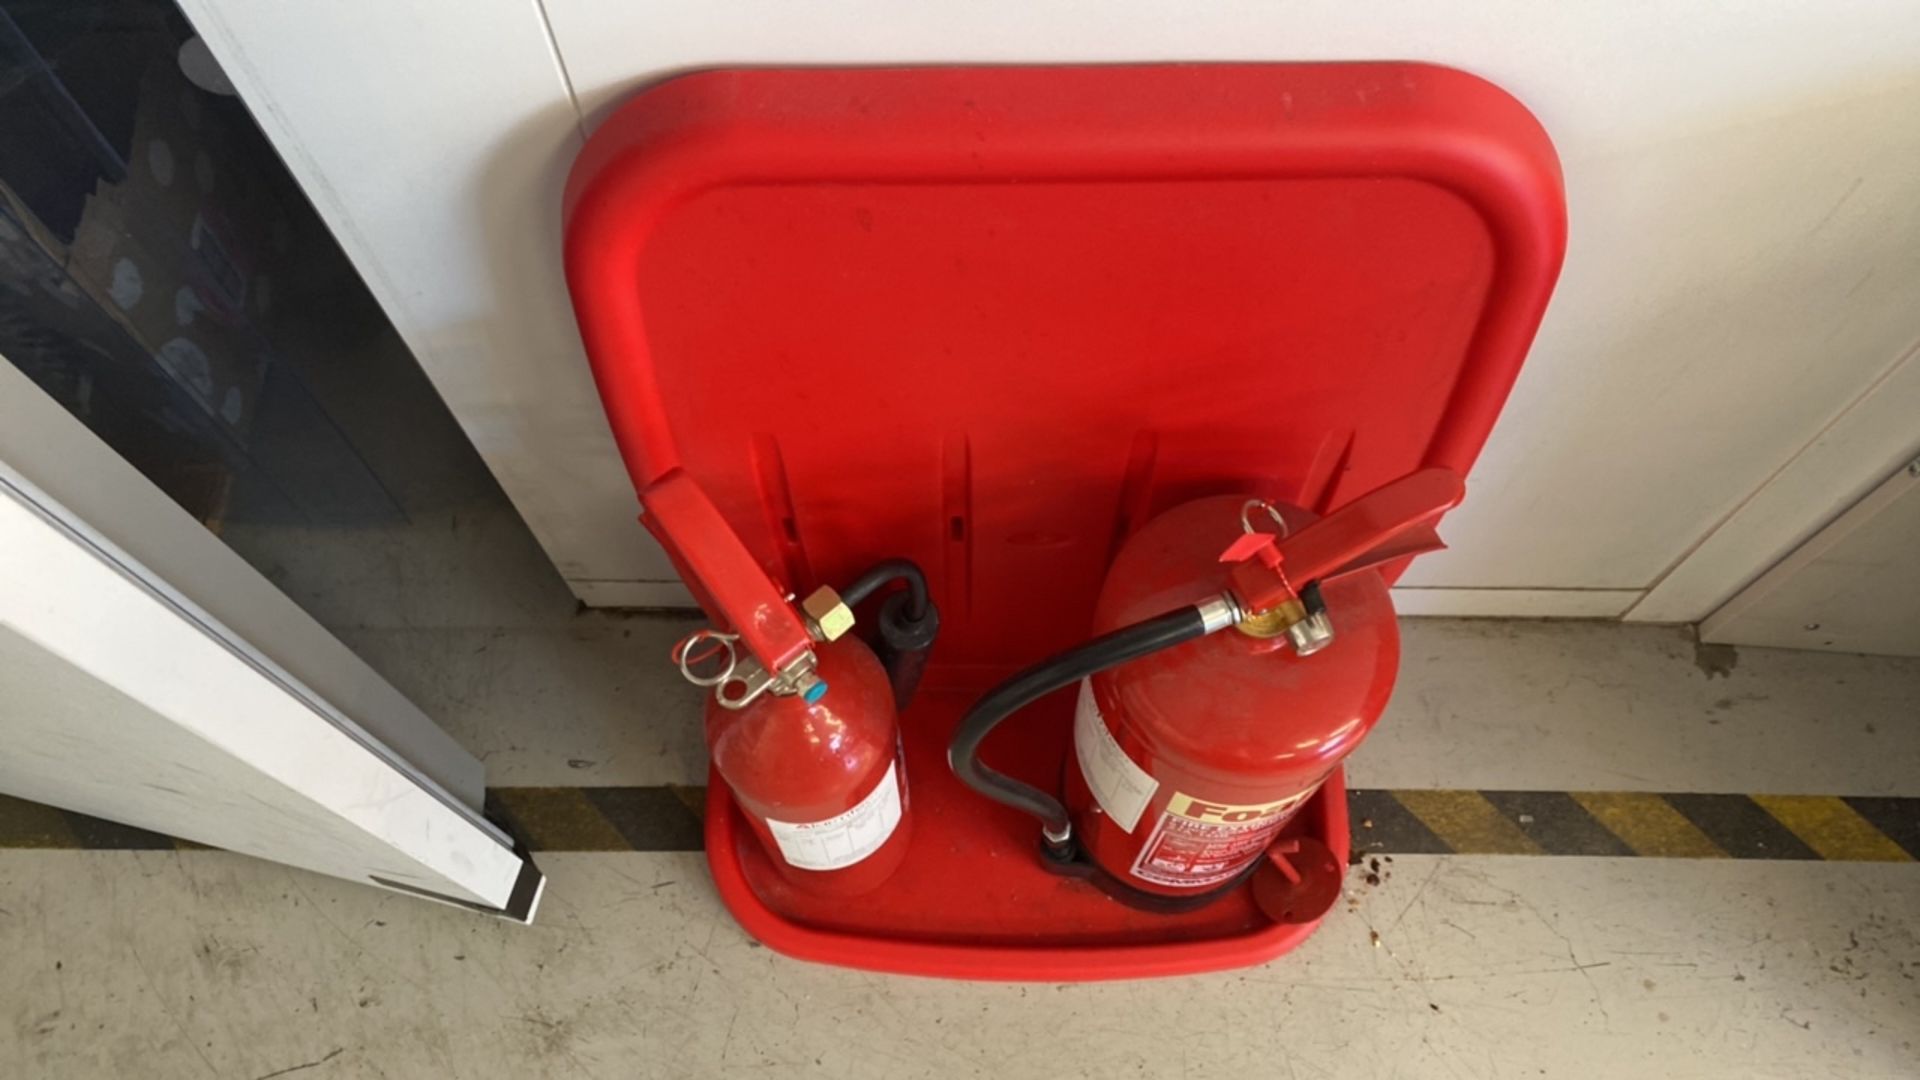 Fire Extinguisher X2 - Image 2 of 3